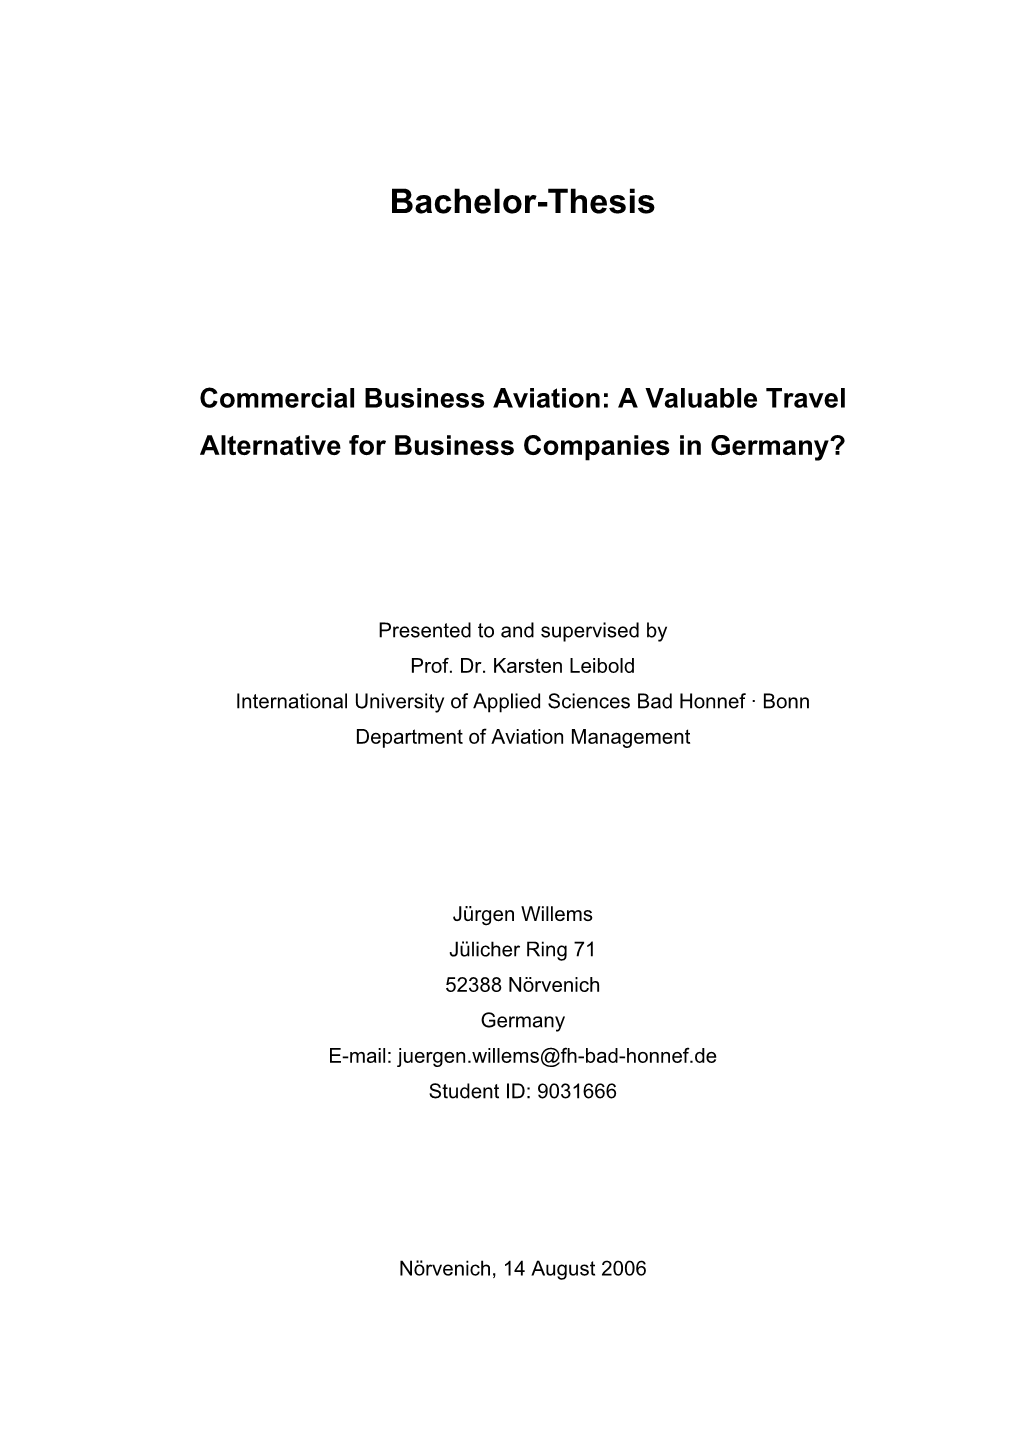 Commercial Business Aviation: a Valuable Travel Alternative for Business Companies in Germany?